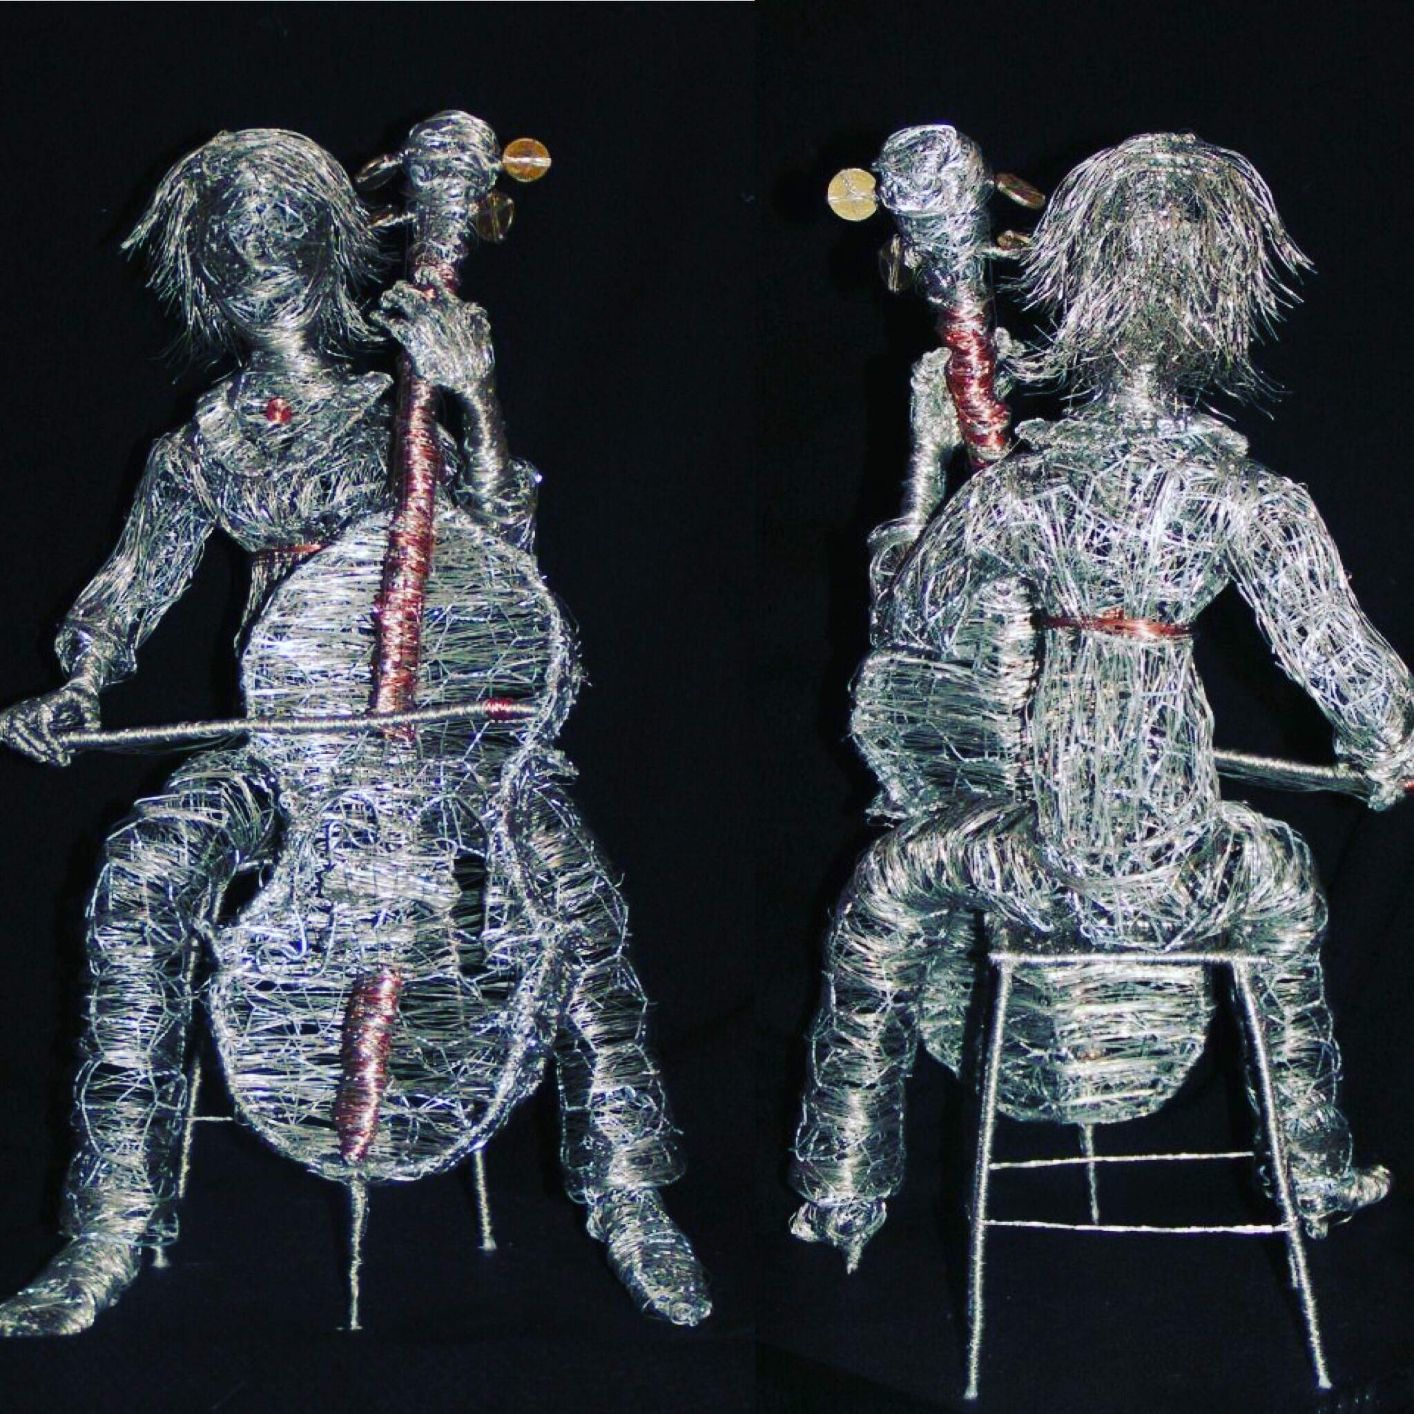 Free Standing Sculpture of a Cello Player